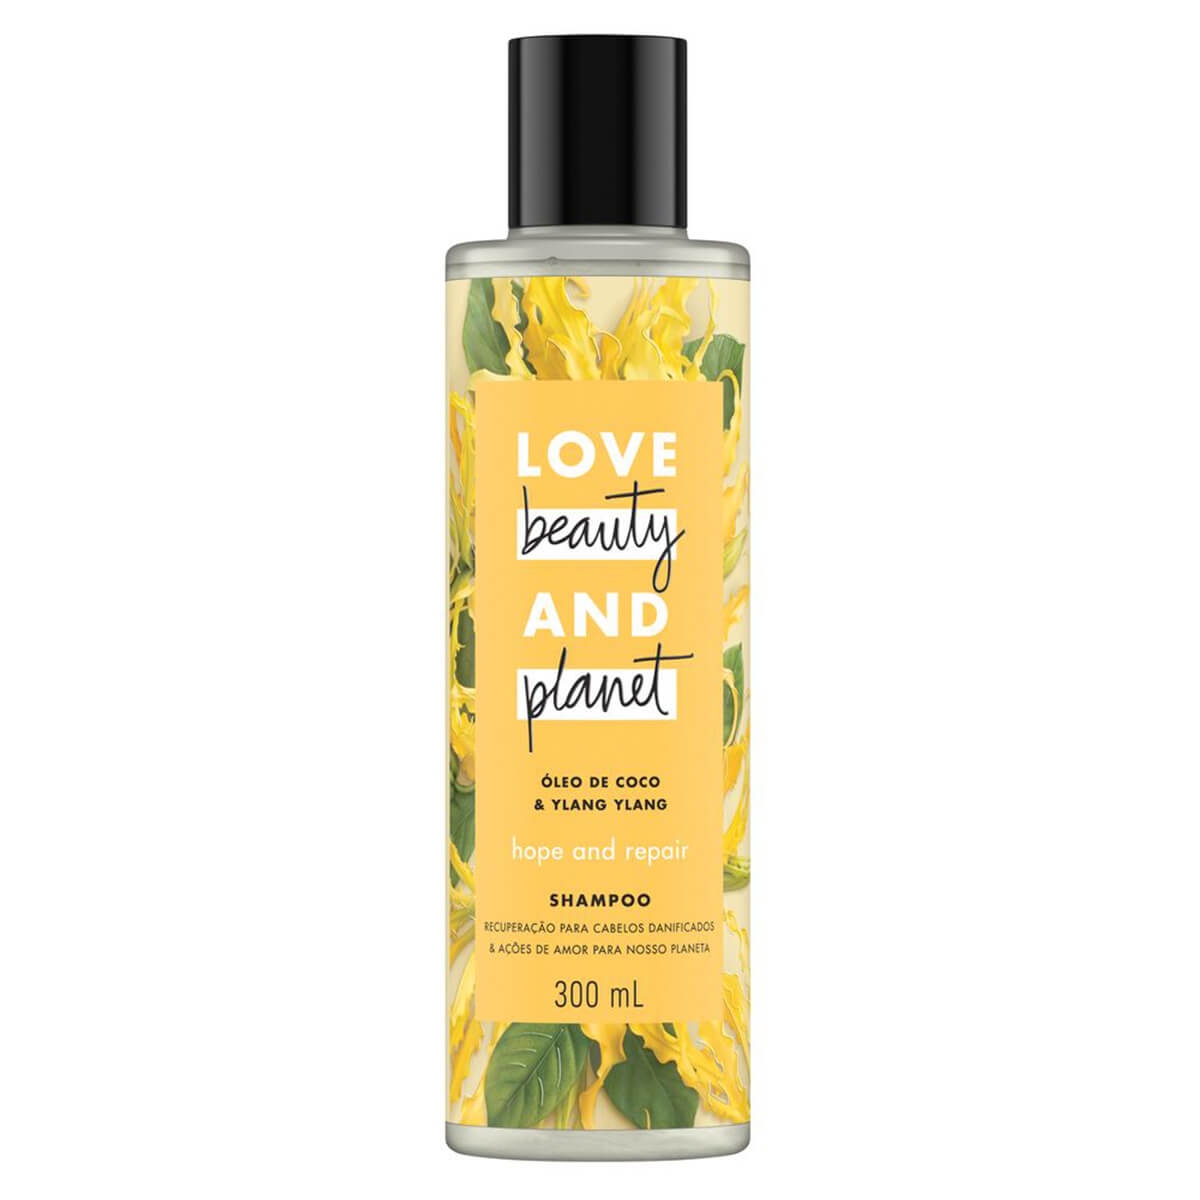 Shampoo Love, Beauty and Planet Hope and Repair 300ml